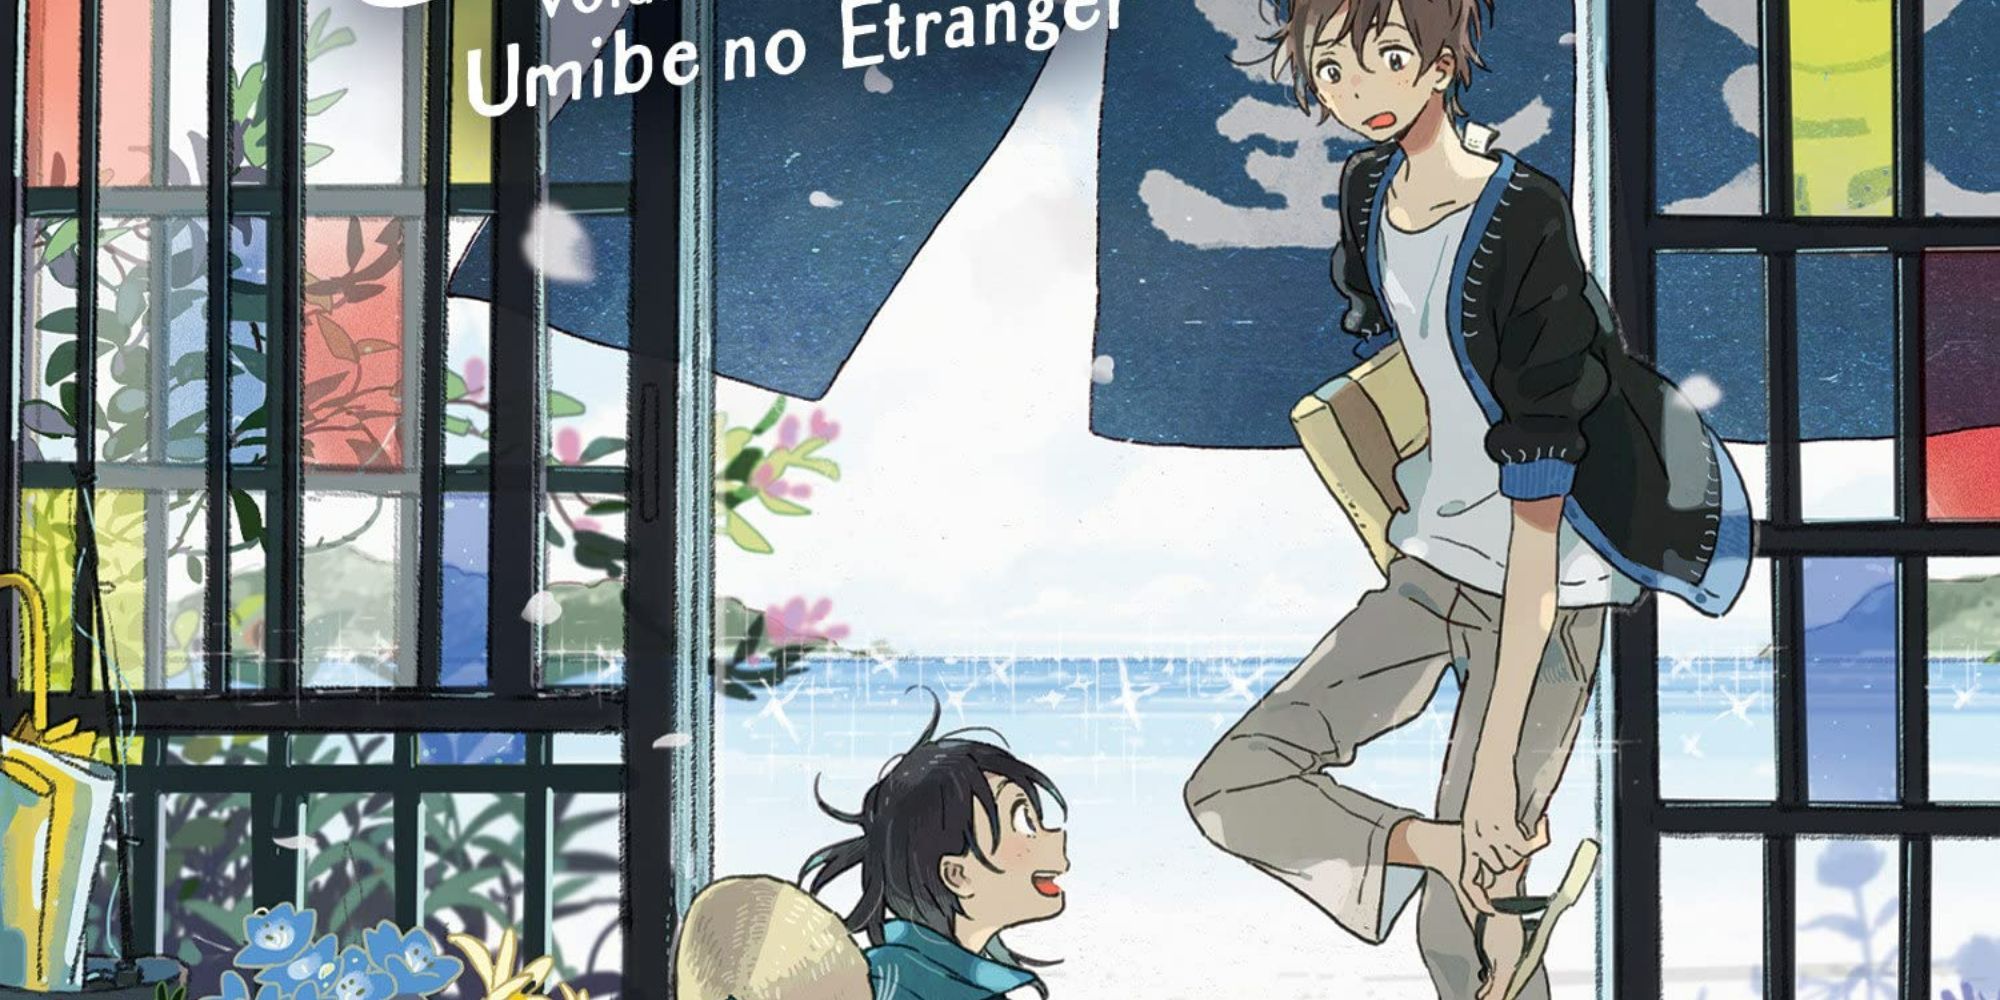 The two main characters from Umibe No Etranger by the beach